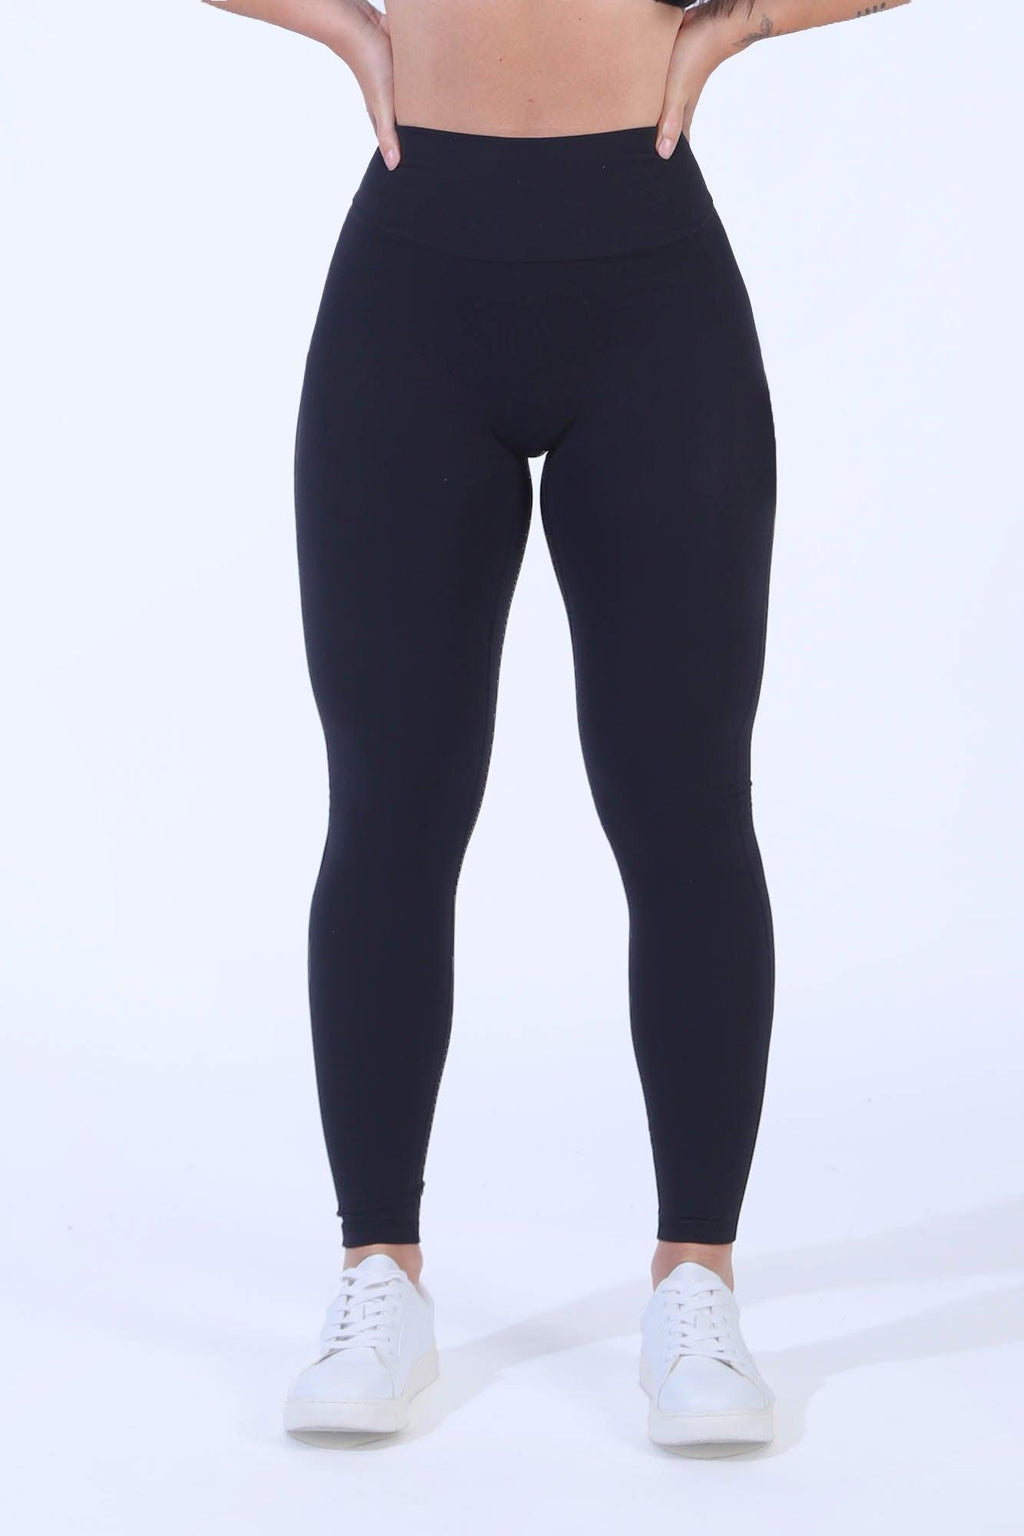 barileng_exhale wearing butt scrunch leggings available in 4